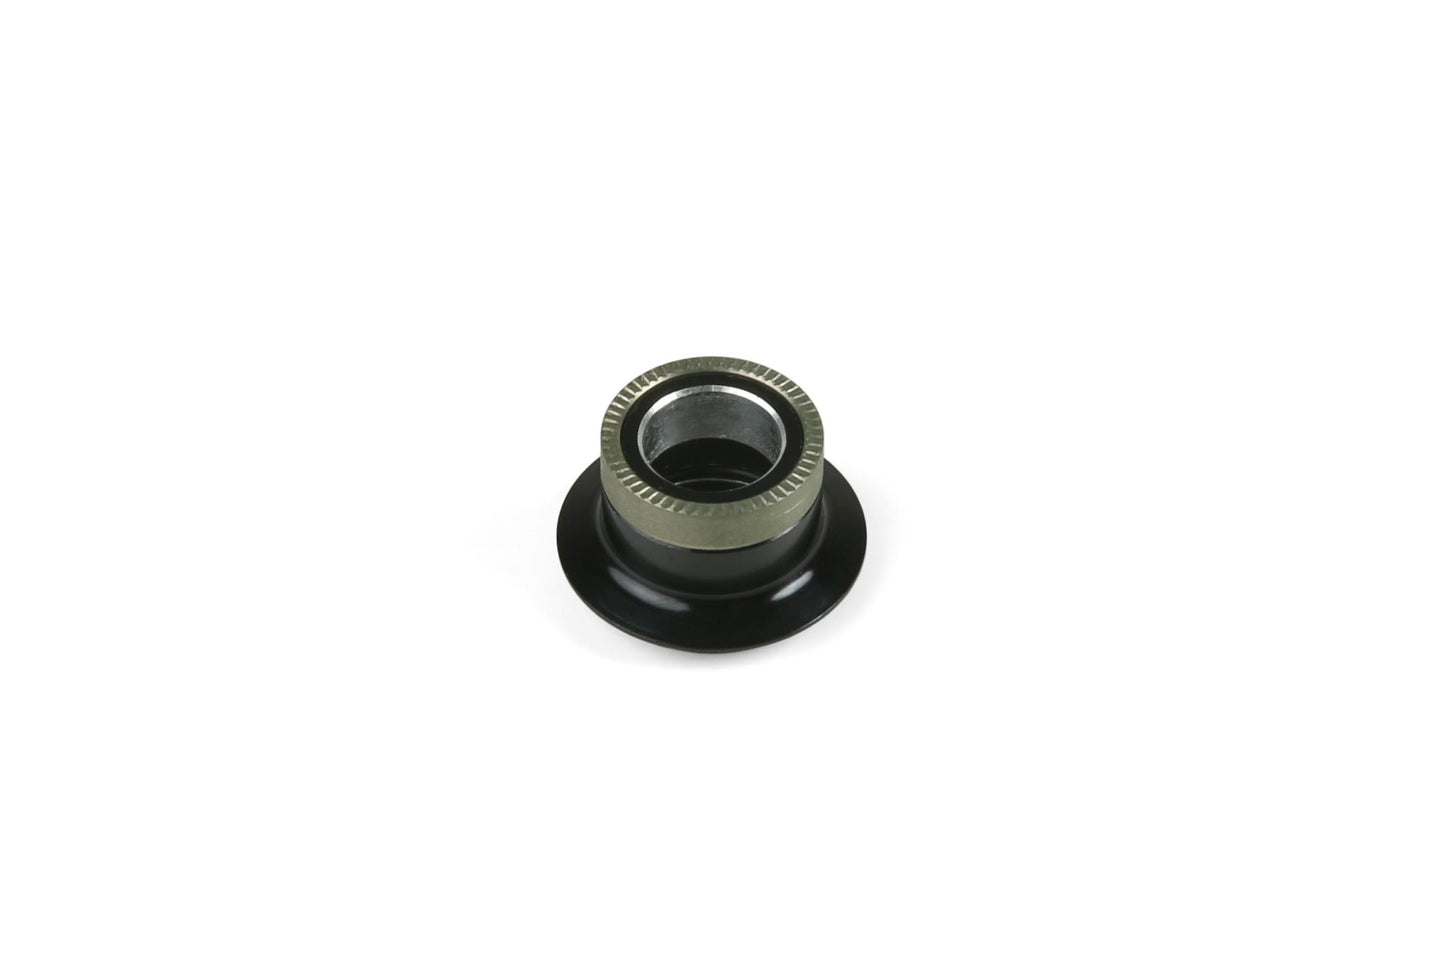 Hope Xc6/Xc3 12mm Non-Drive Spacer - Black